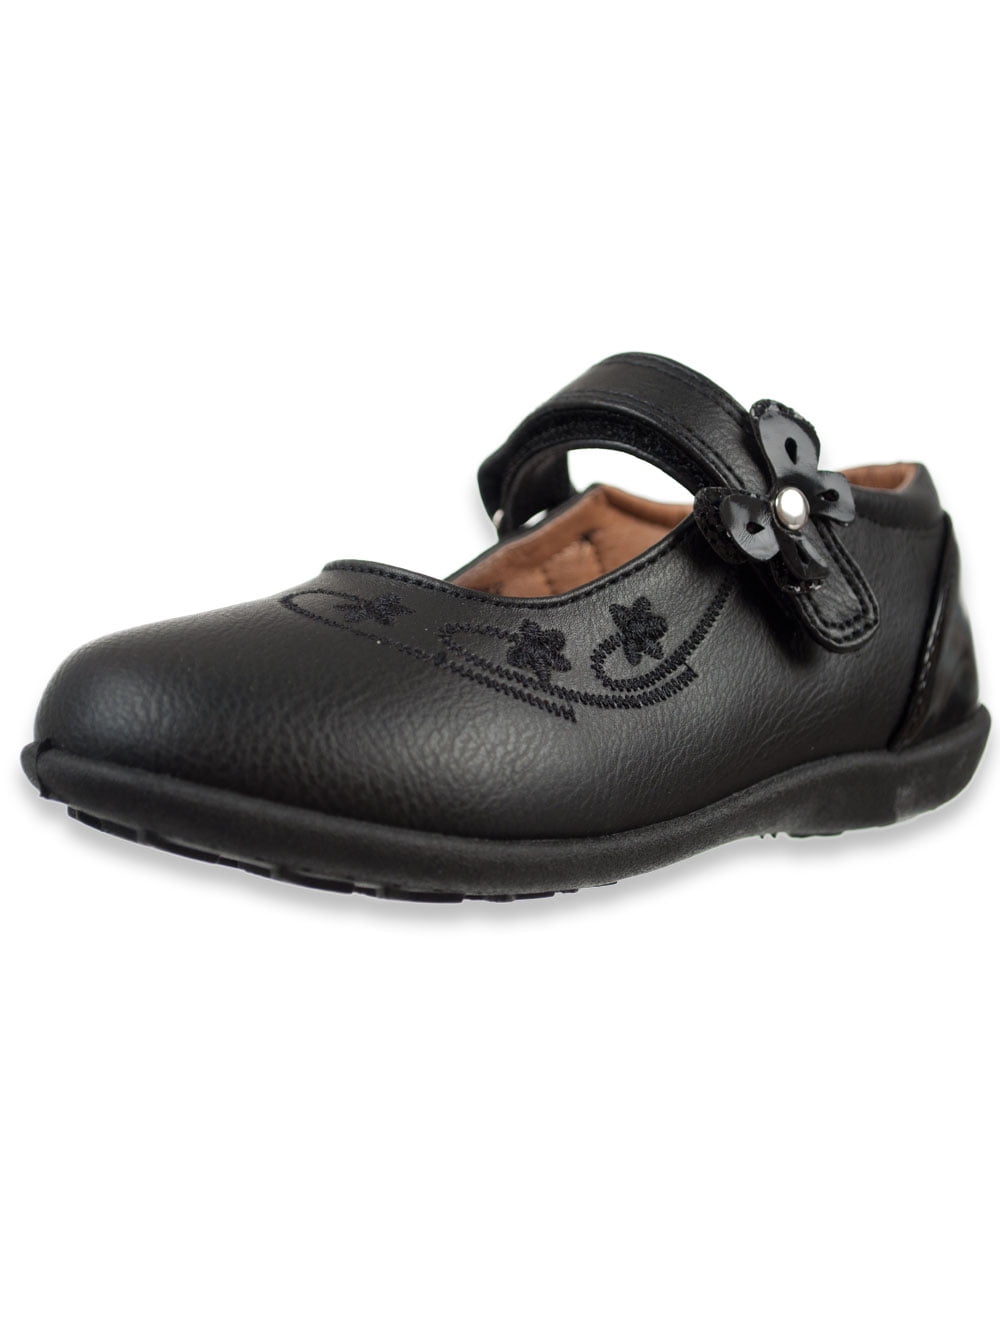 INFANT GIRLS BLACK CASUAL SCHOOL SHOES,STRAP FASTENING SIZES 4-12 RUBY 